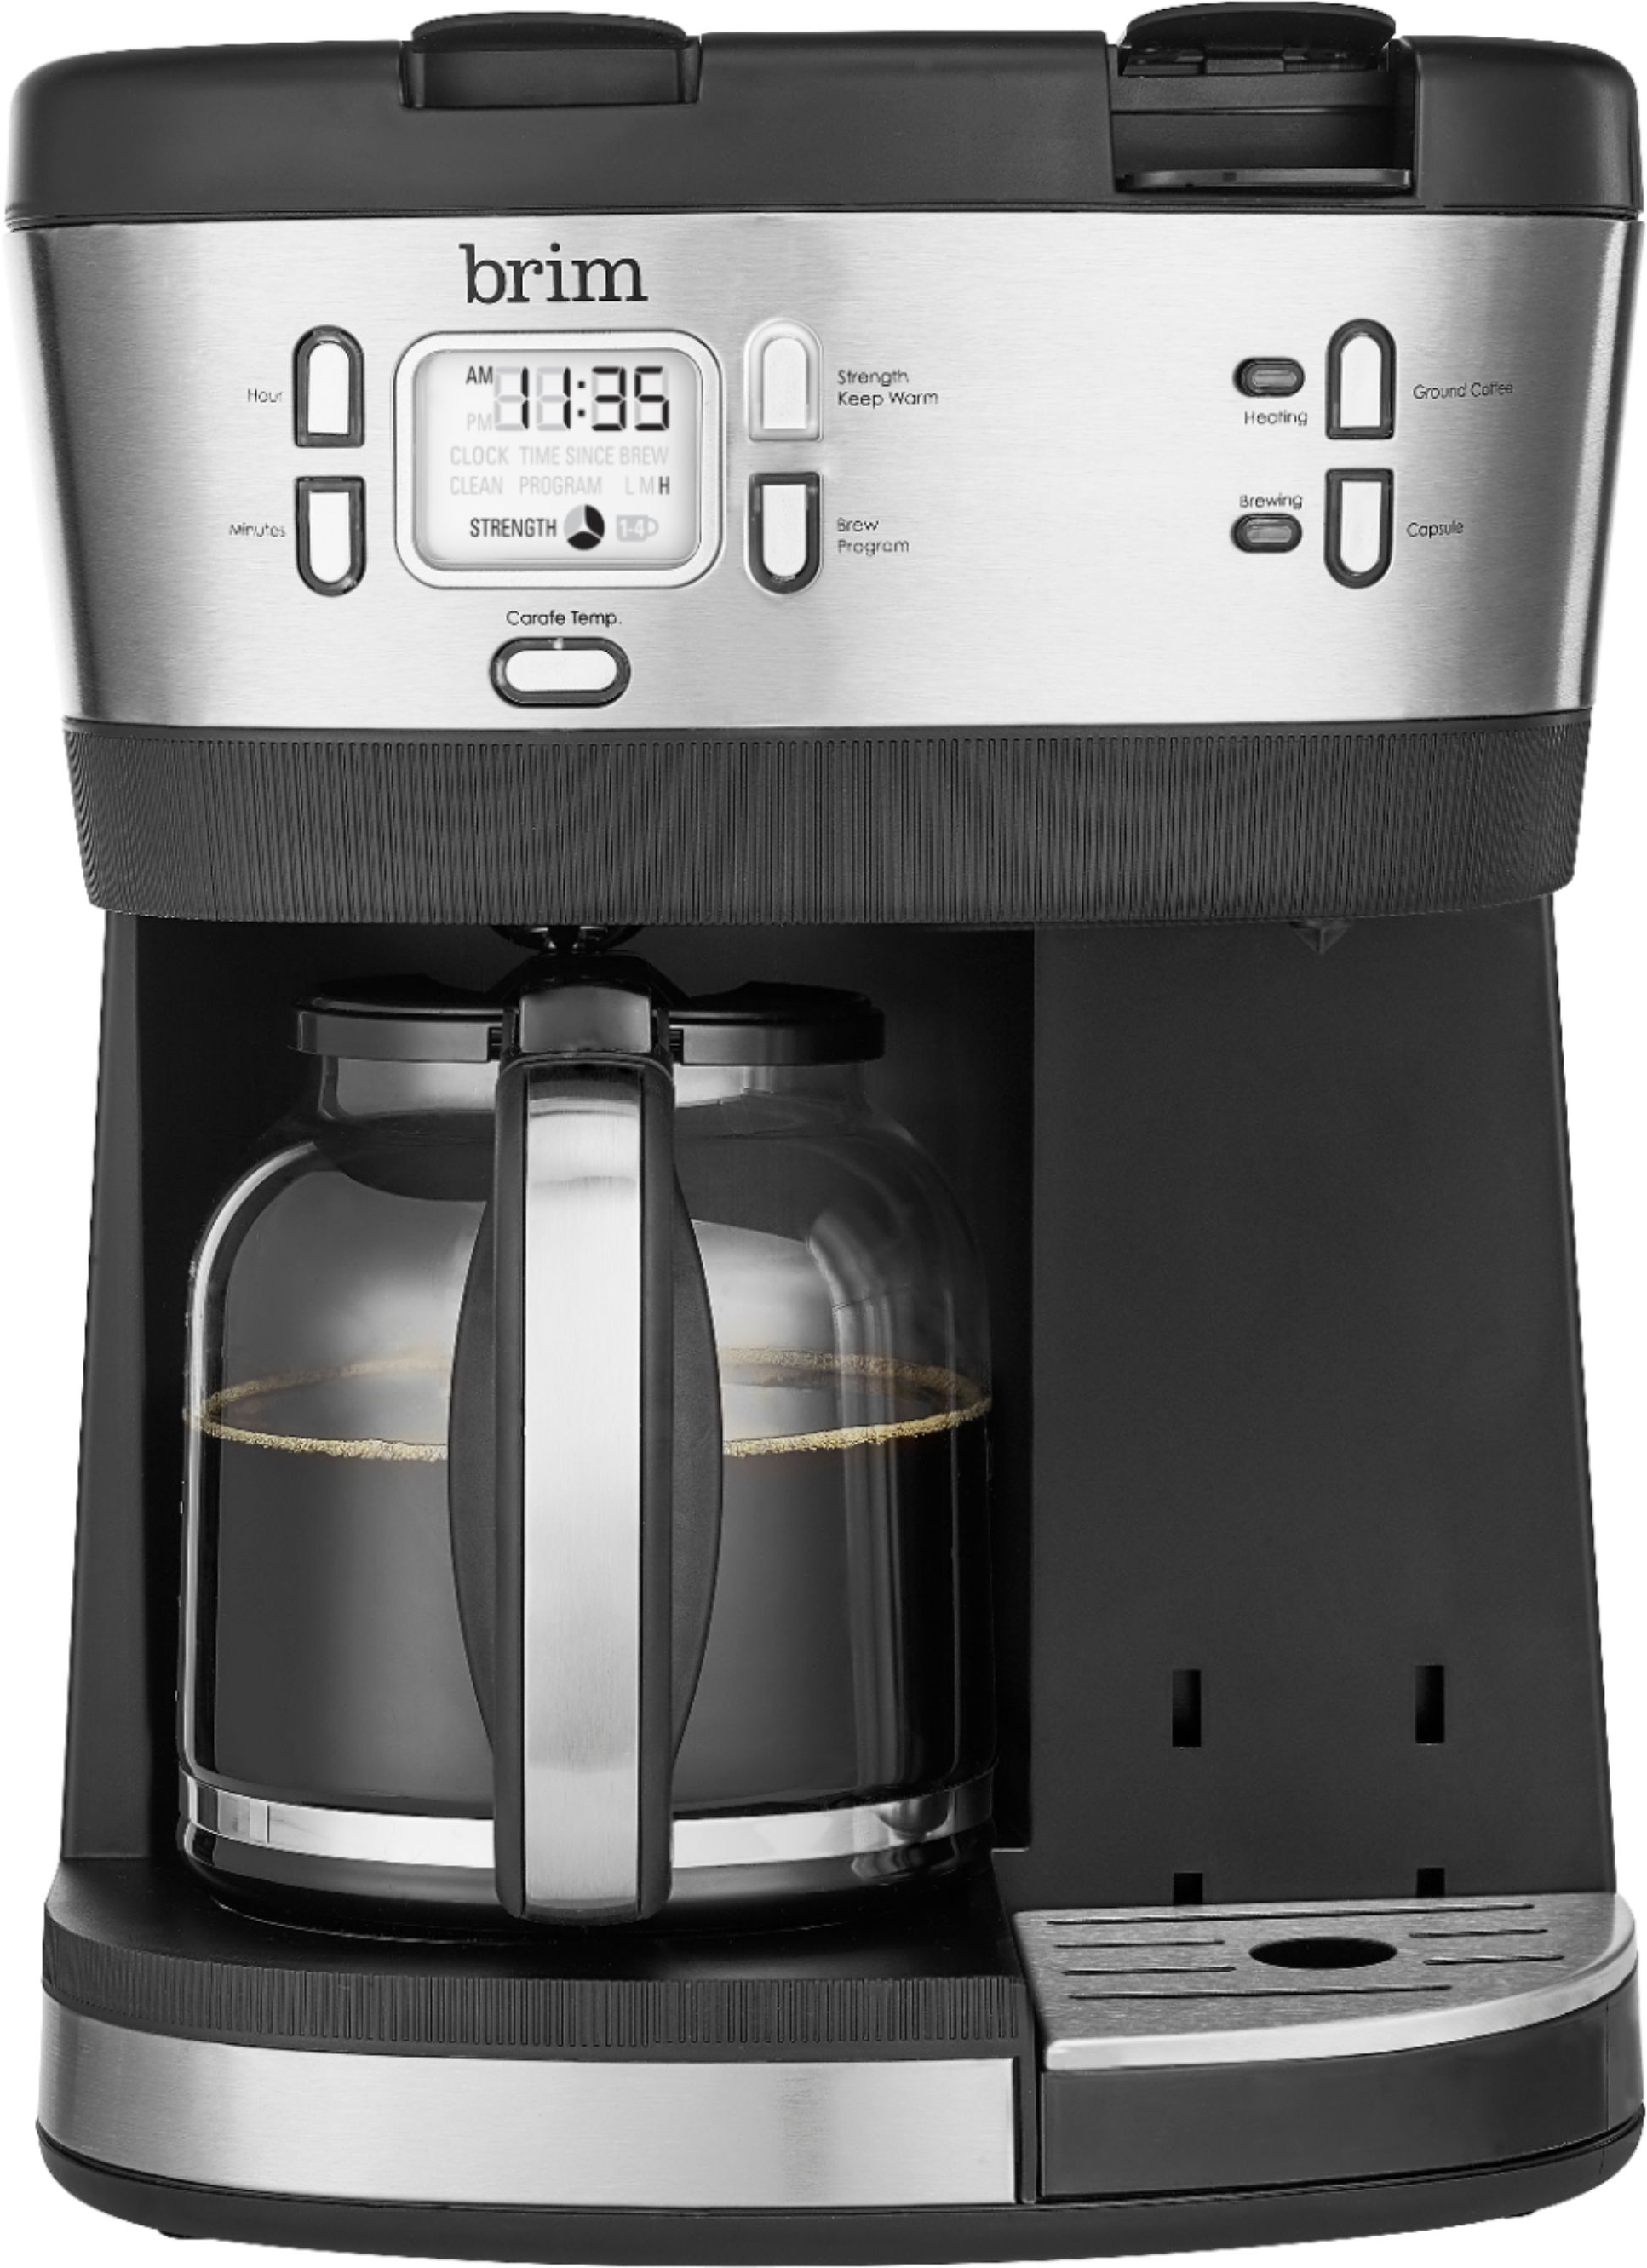 Best Buy: Bella Dots Collection 12 Cup Manual Coffee Maker White BLA13659